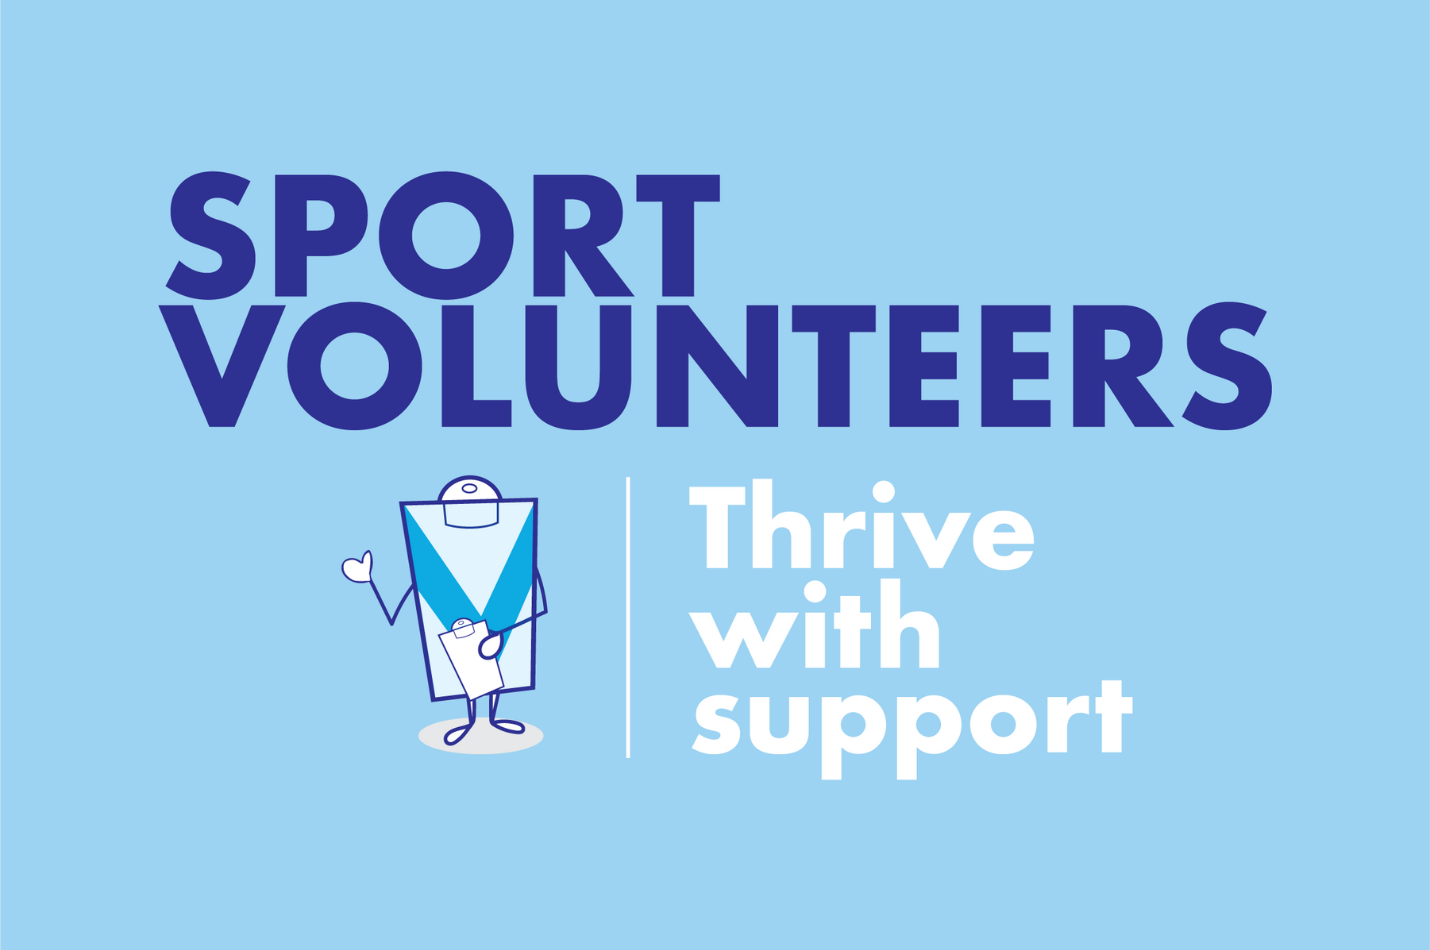 Text reading: 'Sport Volunteers, Thrive with support